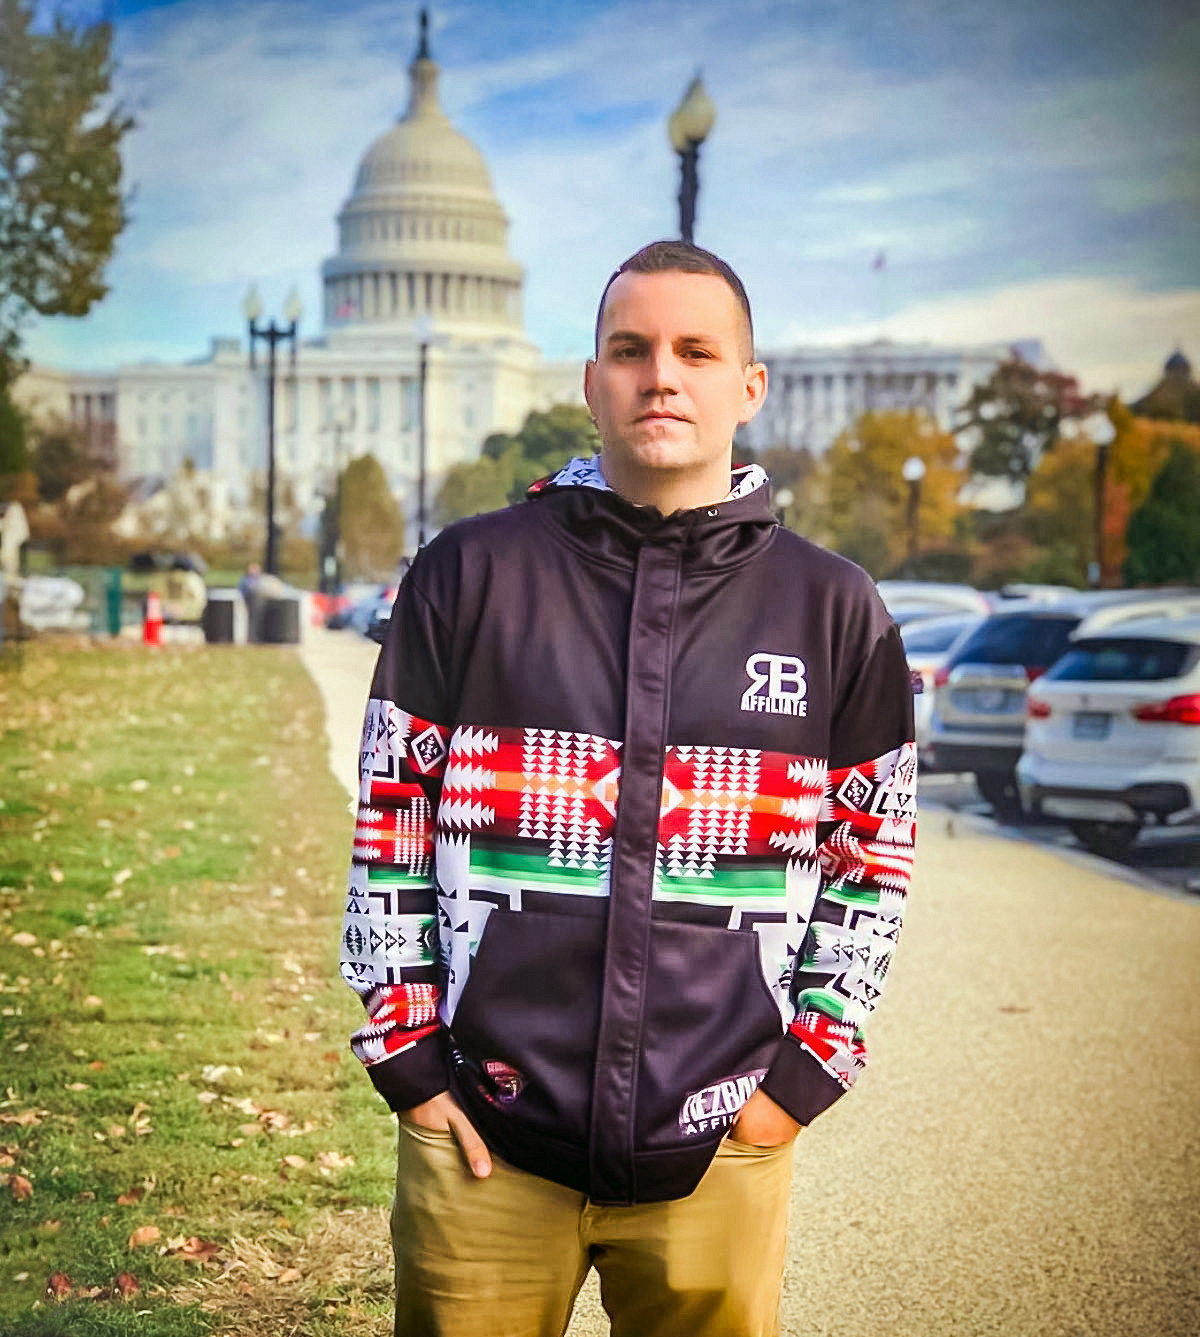 Before moving back to Oregon in 2018, Tony Aaron Fuller ’05 lived in Washington, D.C. He worked as a public affairs specialist at the National Headquarters of the Indian Health Service and as the communications and media coordinator for the National Council of Urban Indian Health.